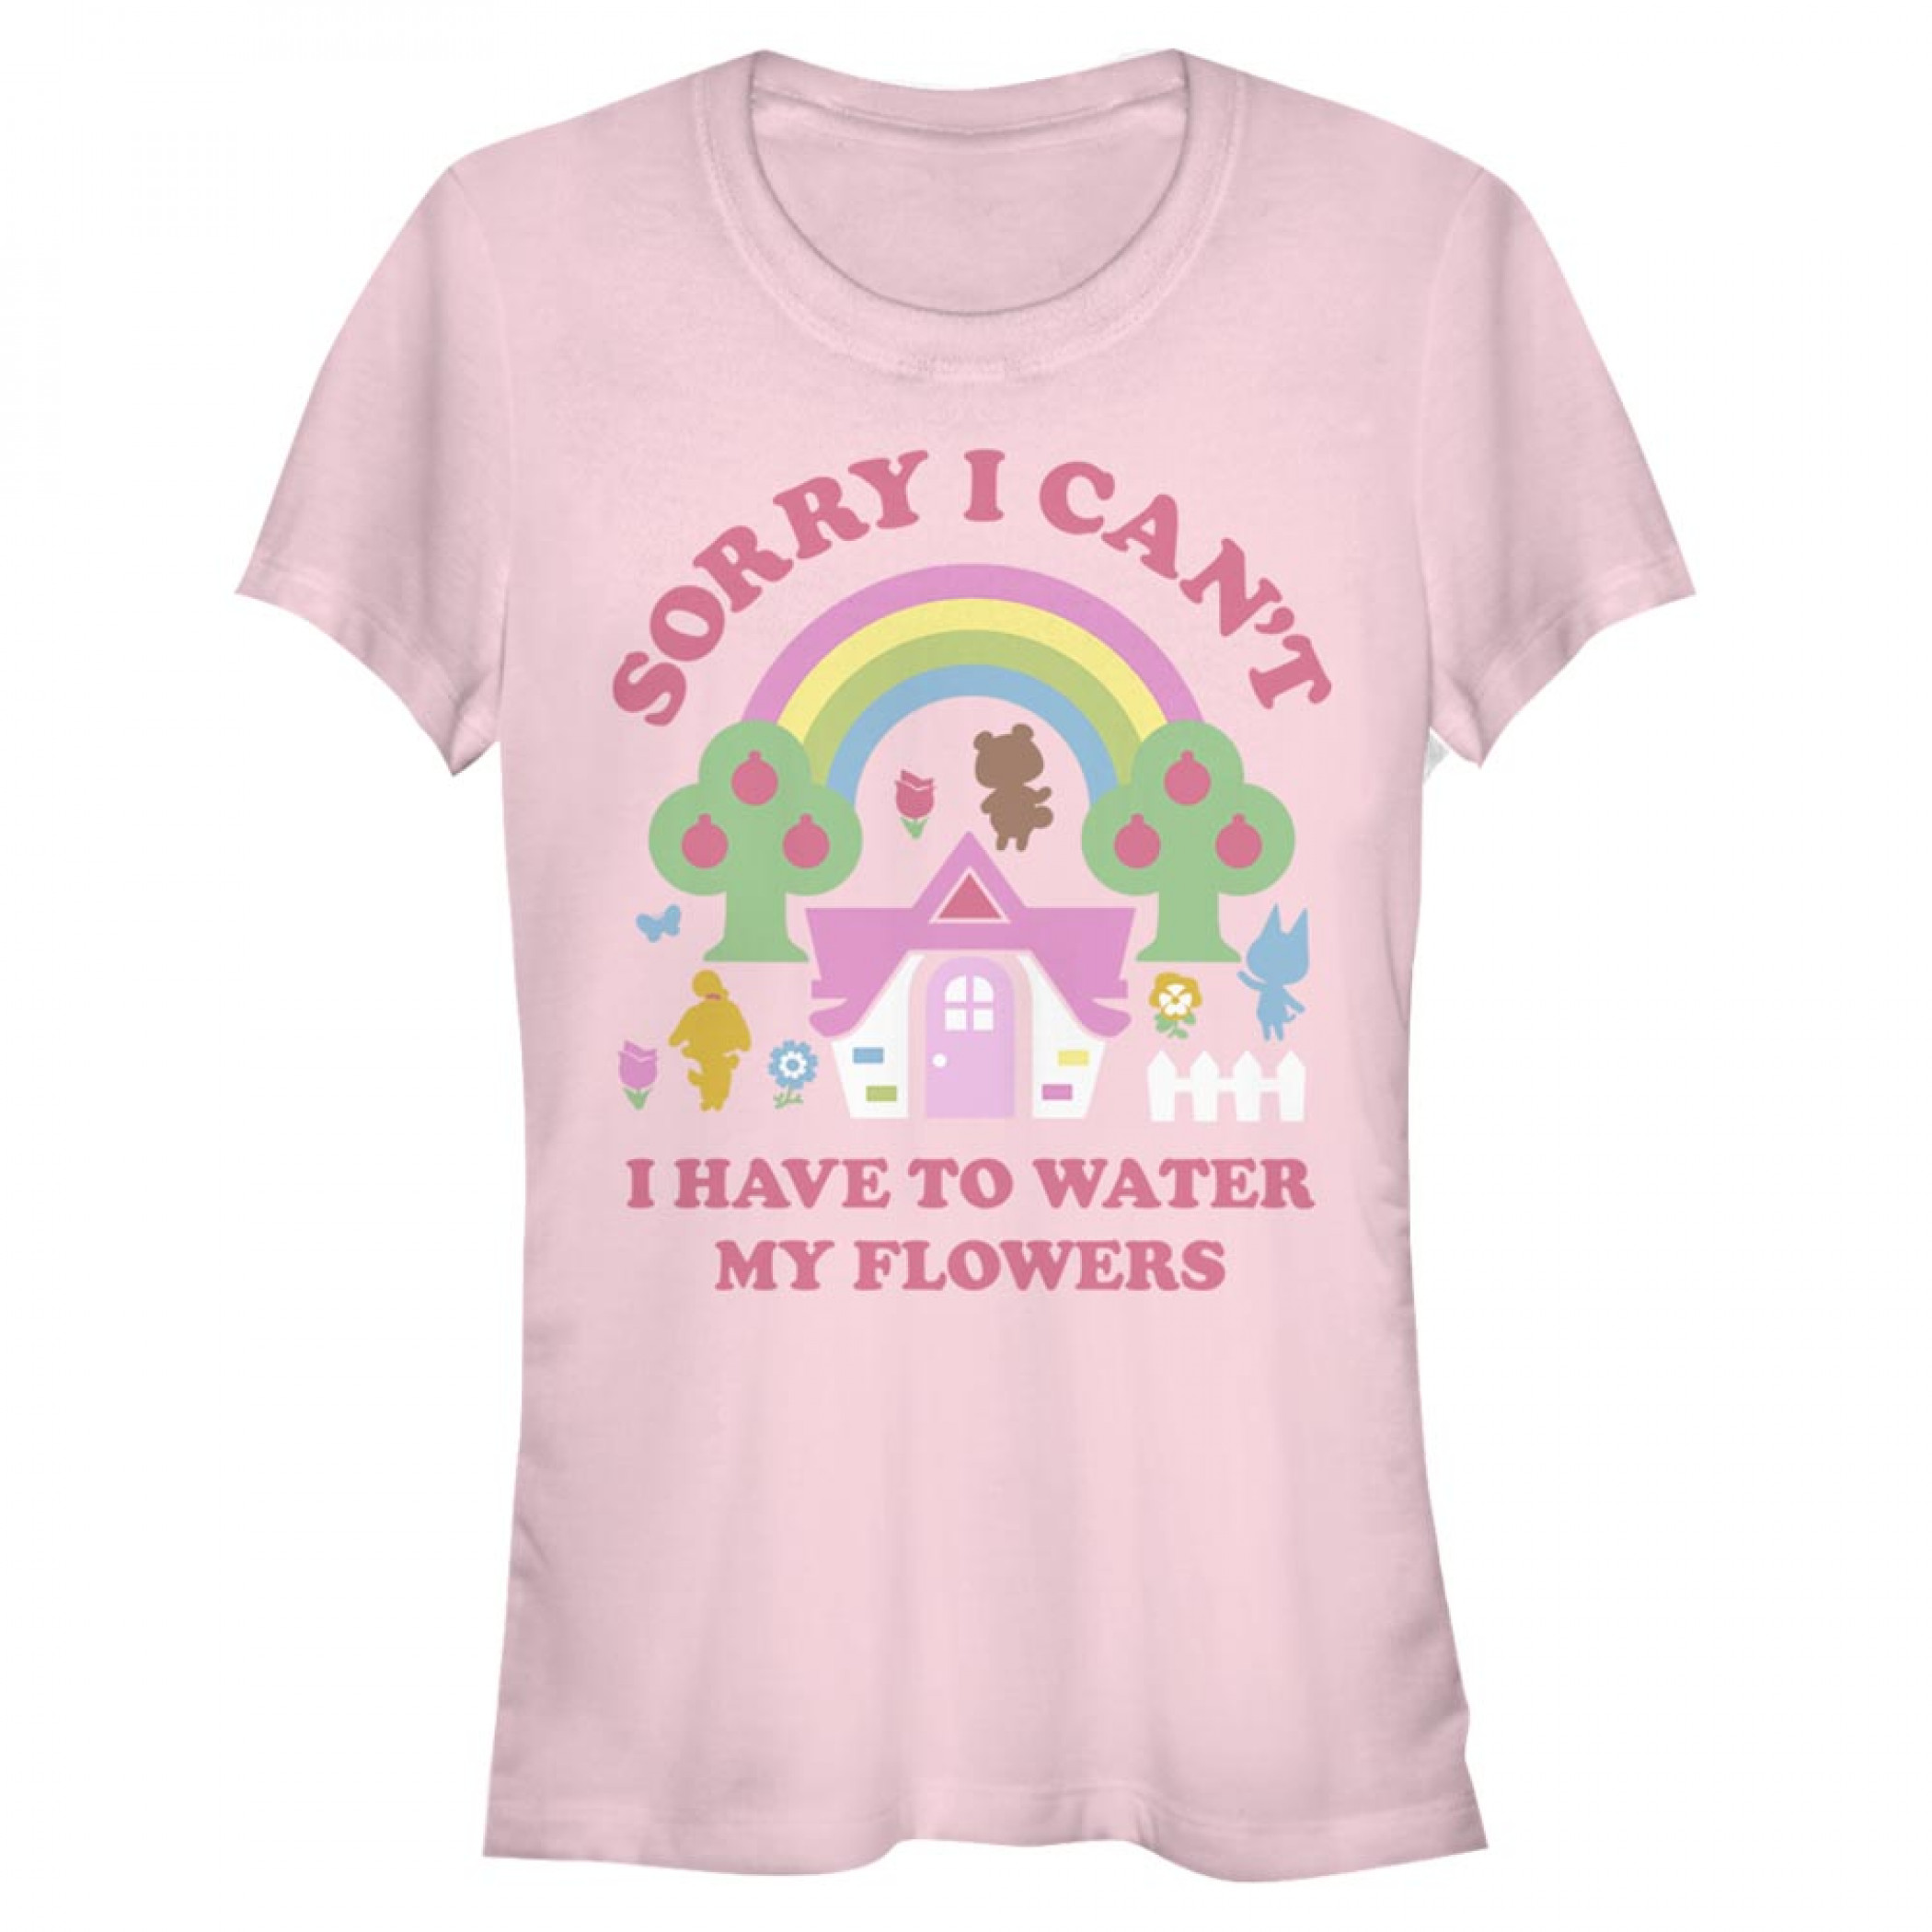 Animal Crossing "Sorry I Can't I Have To Water My Plants" Women's T-Shirt